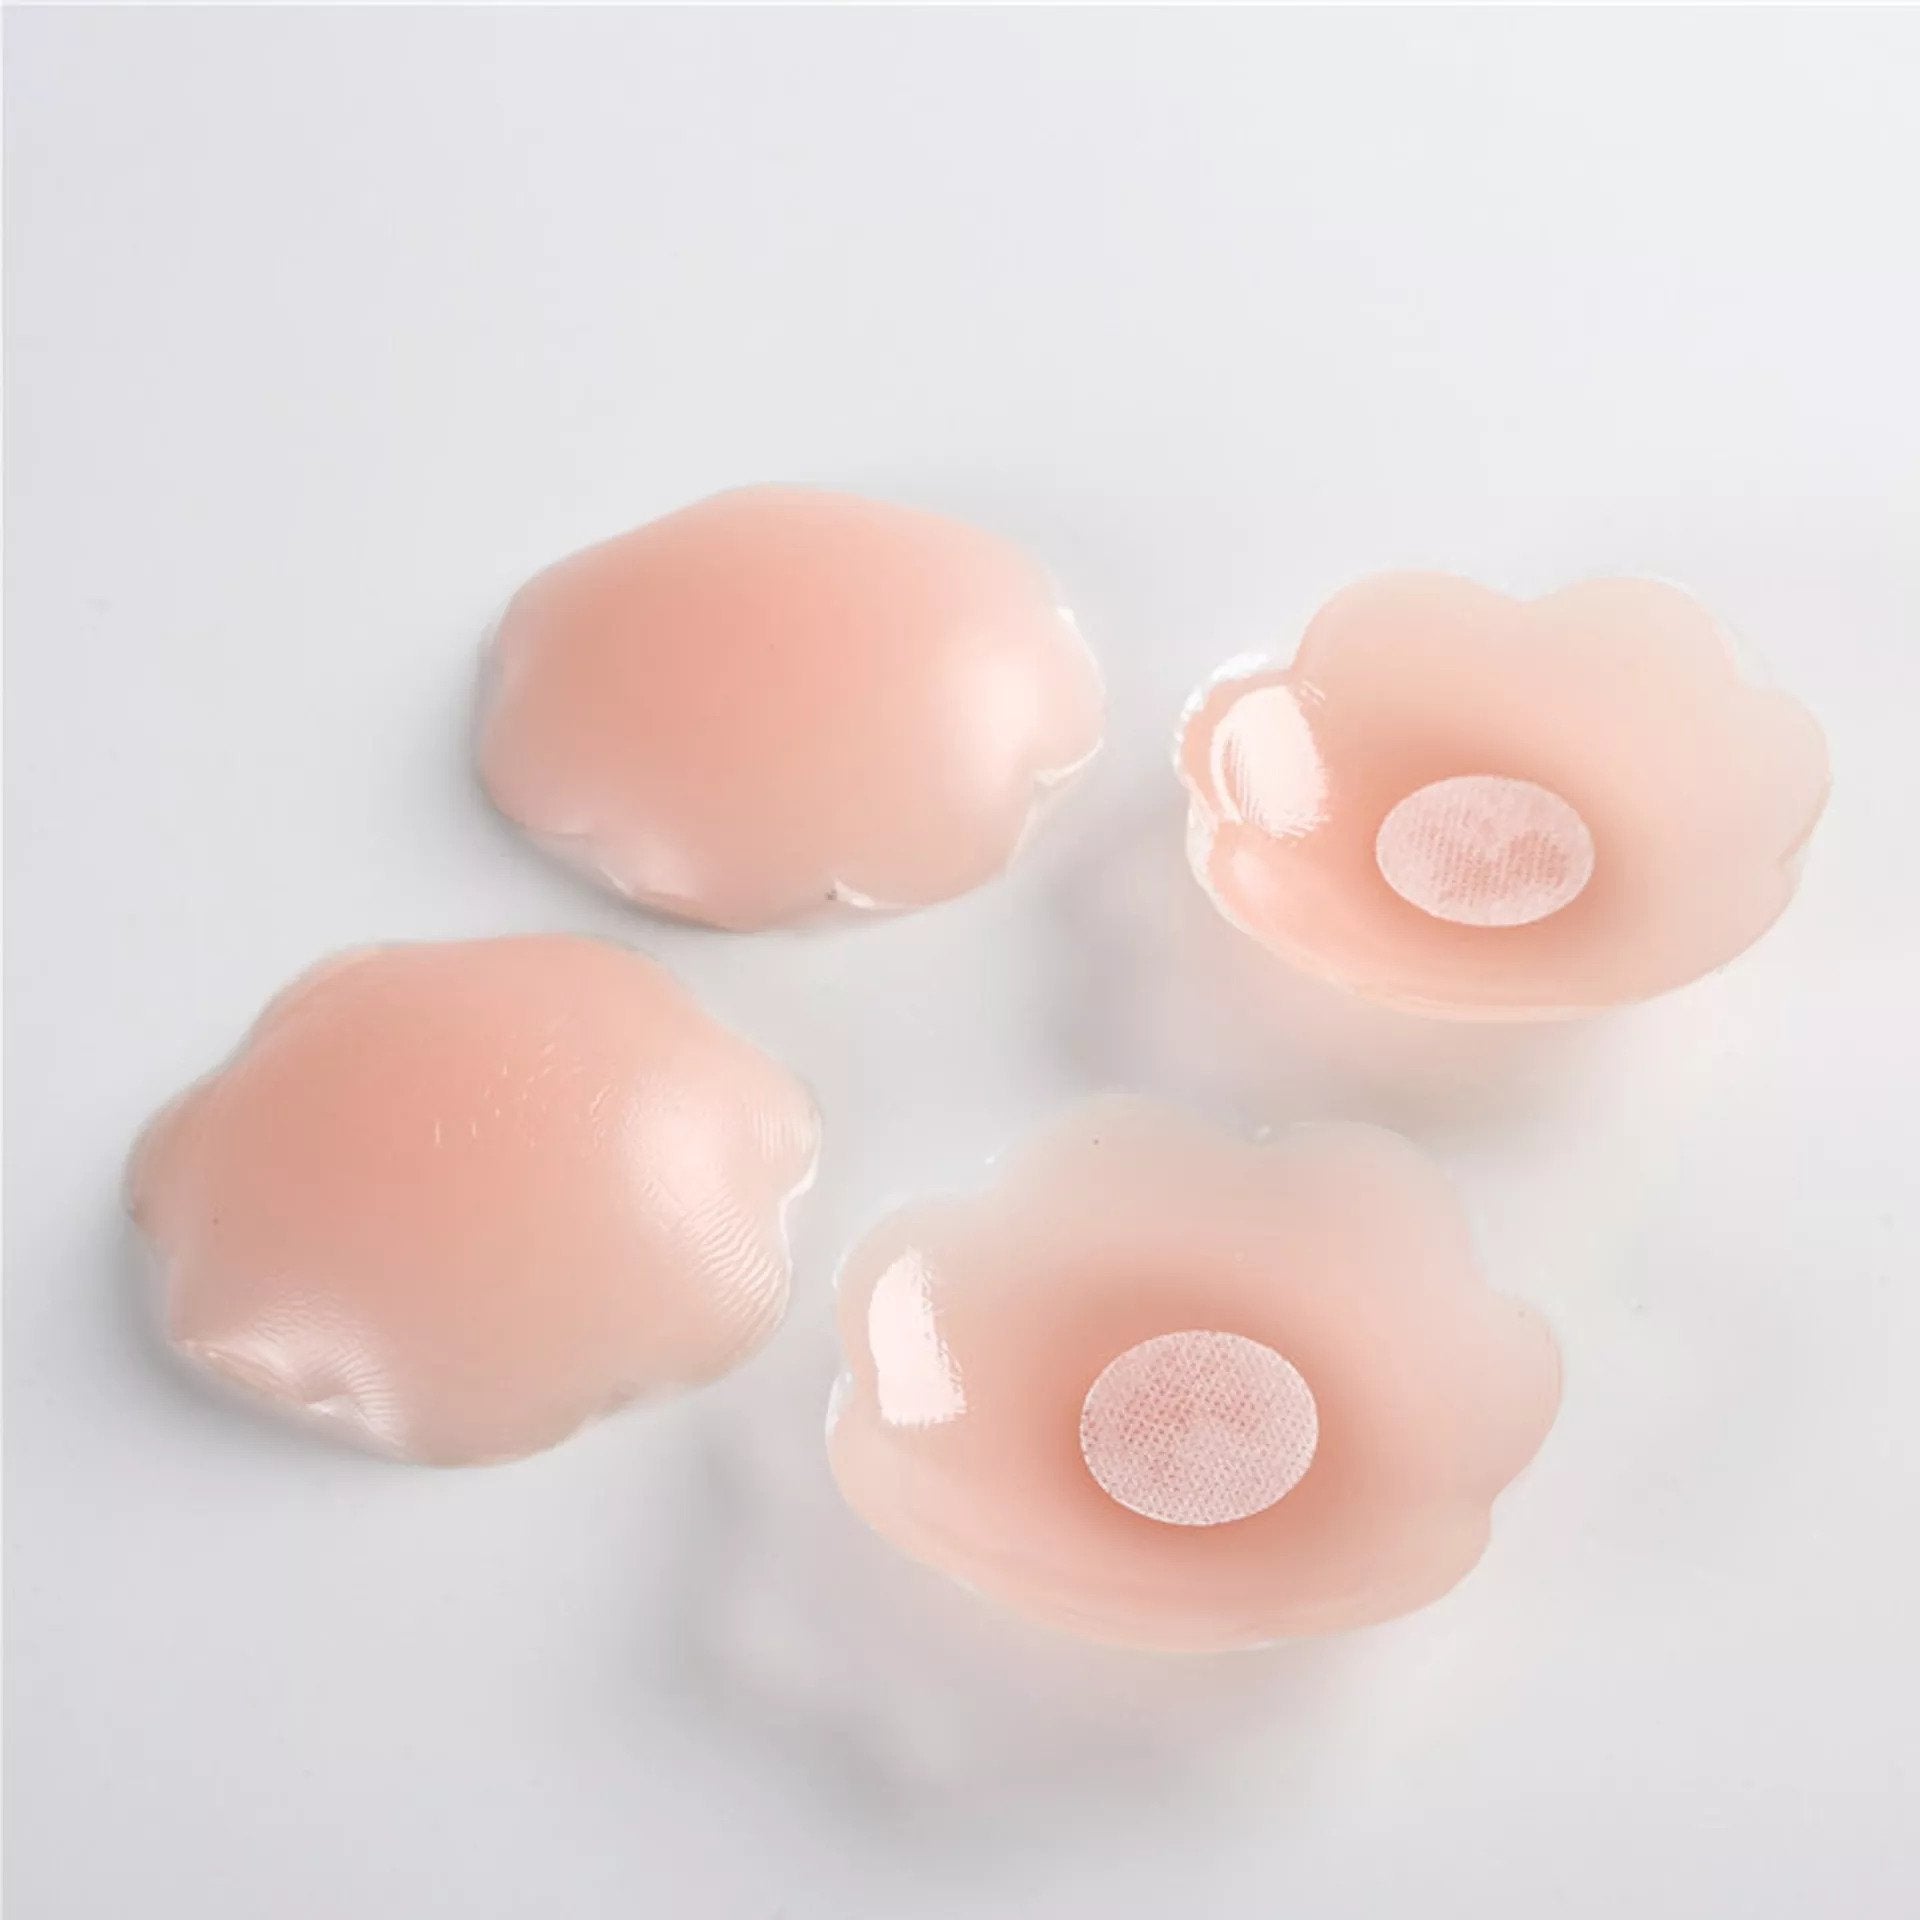 Go Nipless Nipple Covers Silicone Pasties For Women - Adhesive